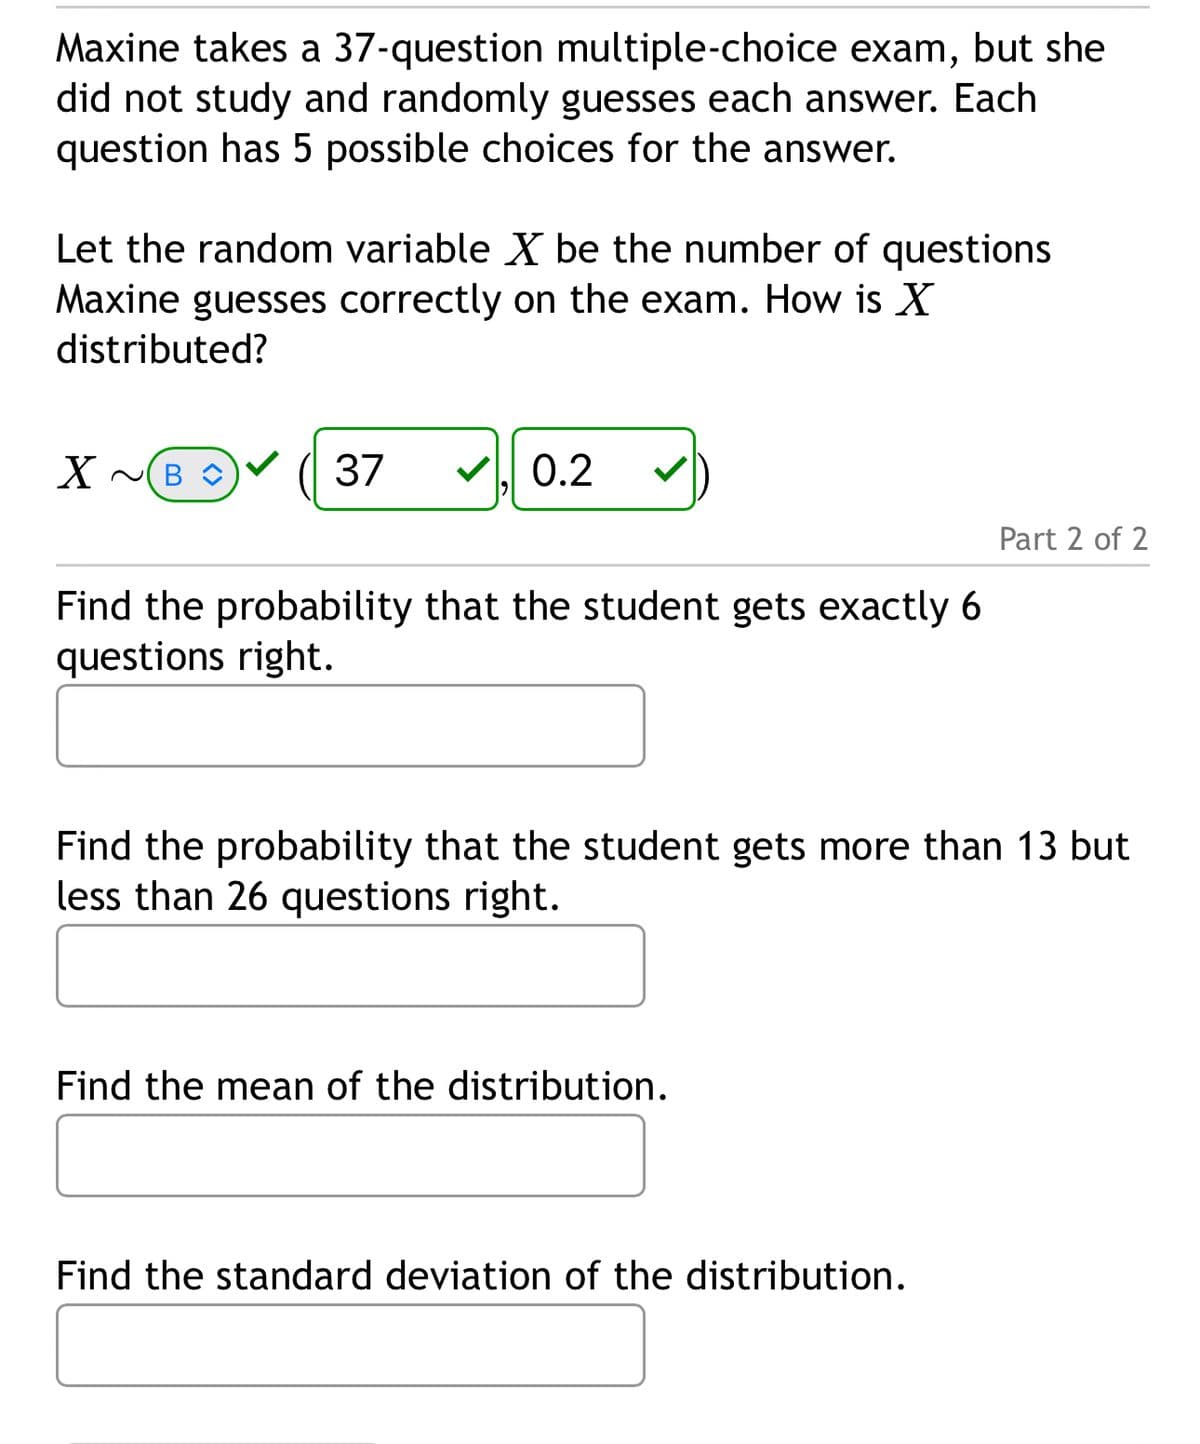 Maxine takes a 37-question multiple-choice exam, but she
did not study and randomly guesses each answer. Each
question has 5 possible choices for the answer.
Let the random variable ✗ be the number of questions
Maxine guesses correctly on the exam. How is X
distributed?
✗~B
37 ☑, 0.2
Find the probability that the student gets exactly 6
questions right.
Part 2 of 2
Find the probability that the student gets more than 13 but
less than 26 questions right.
Find the mean of the distribution.
Find the standard deviation of the distribution.